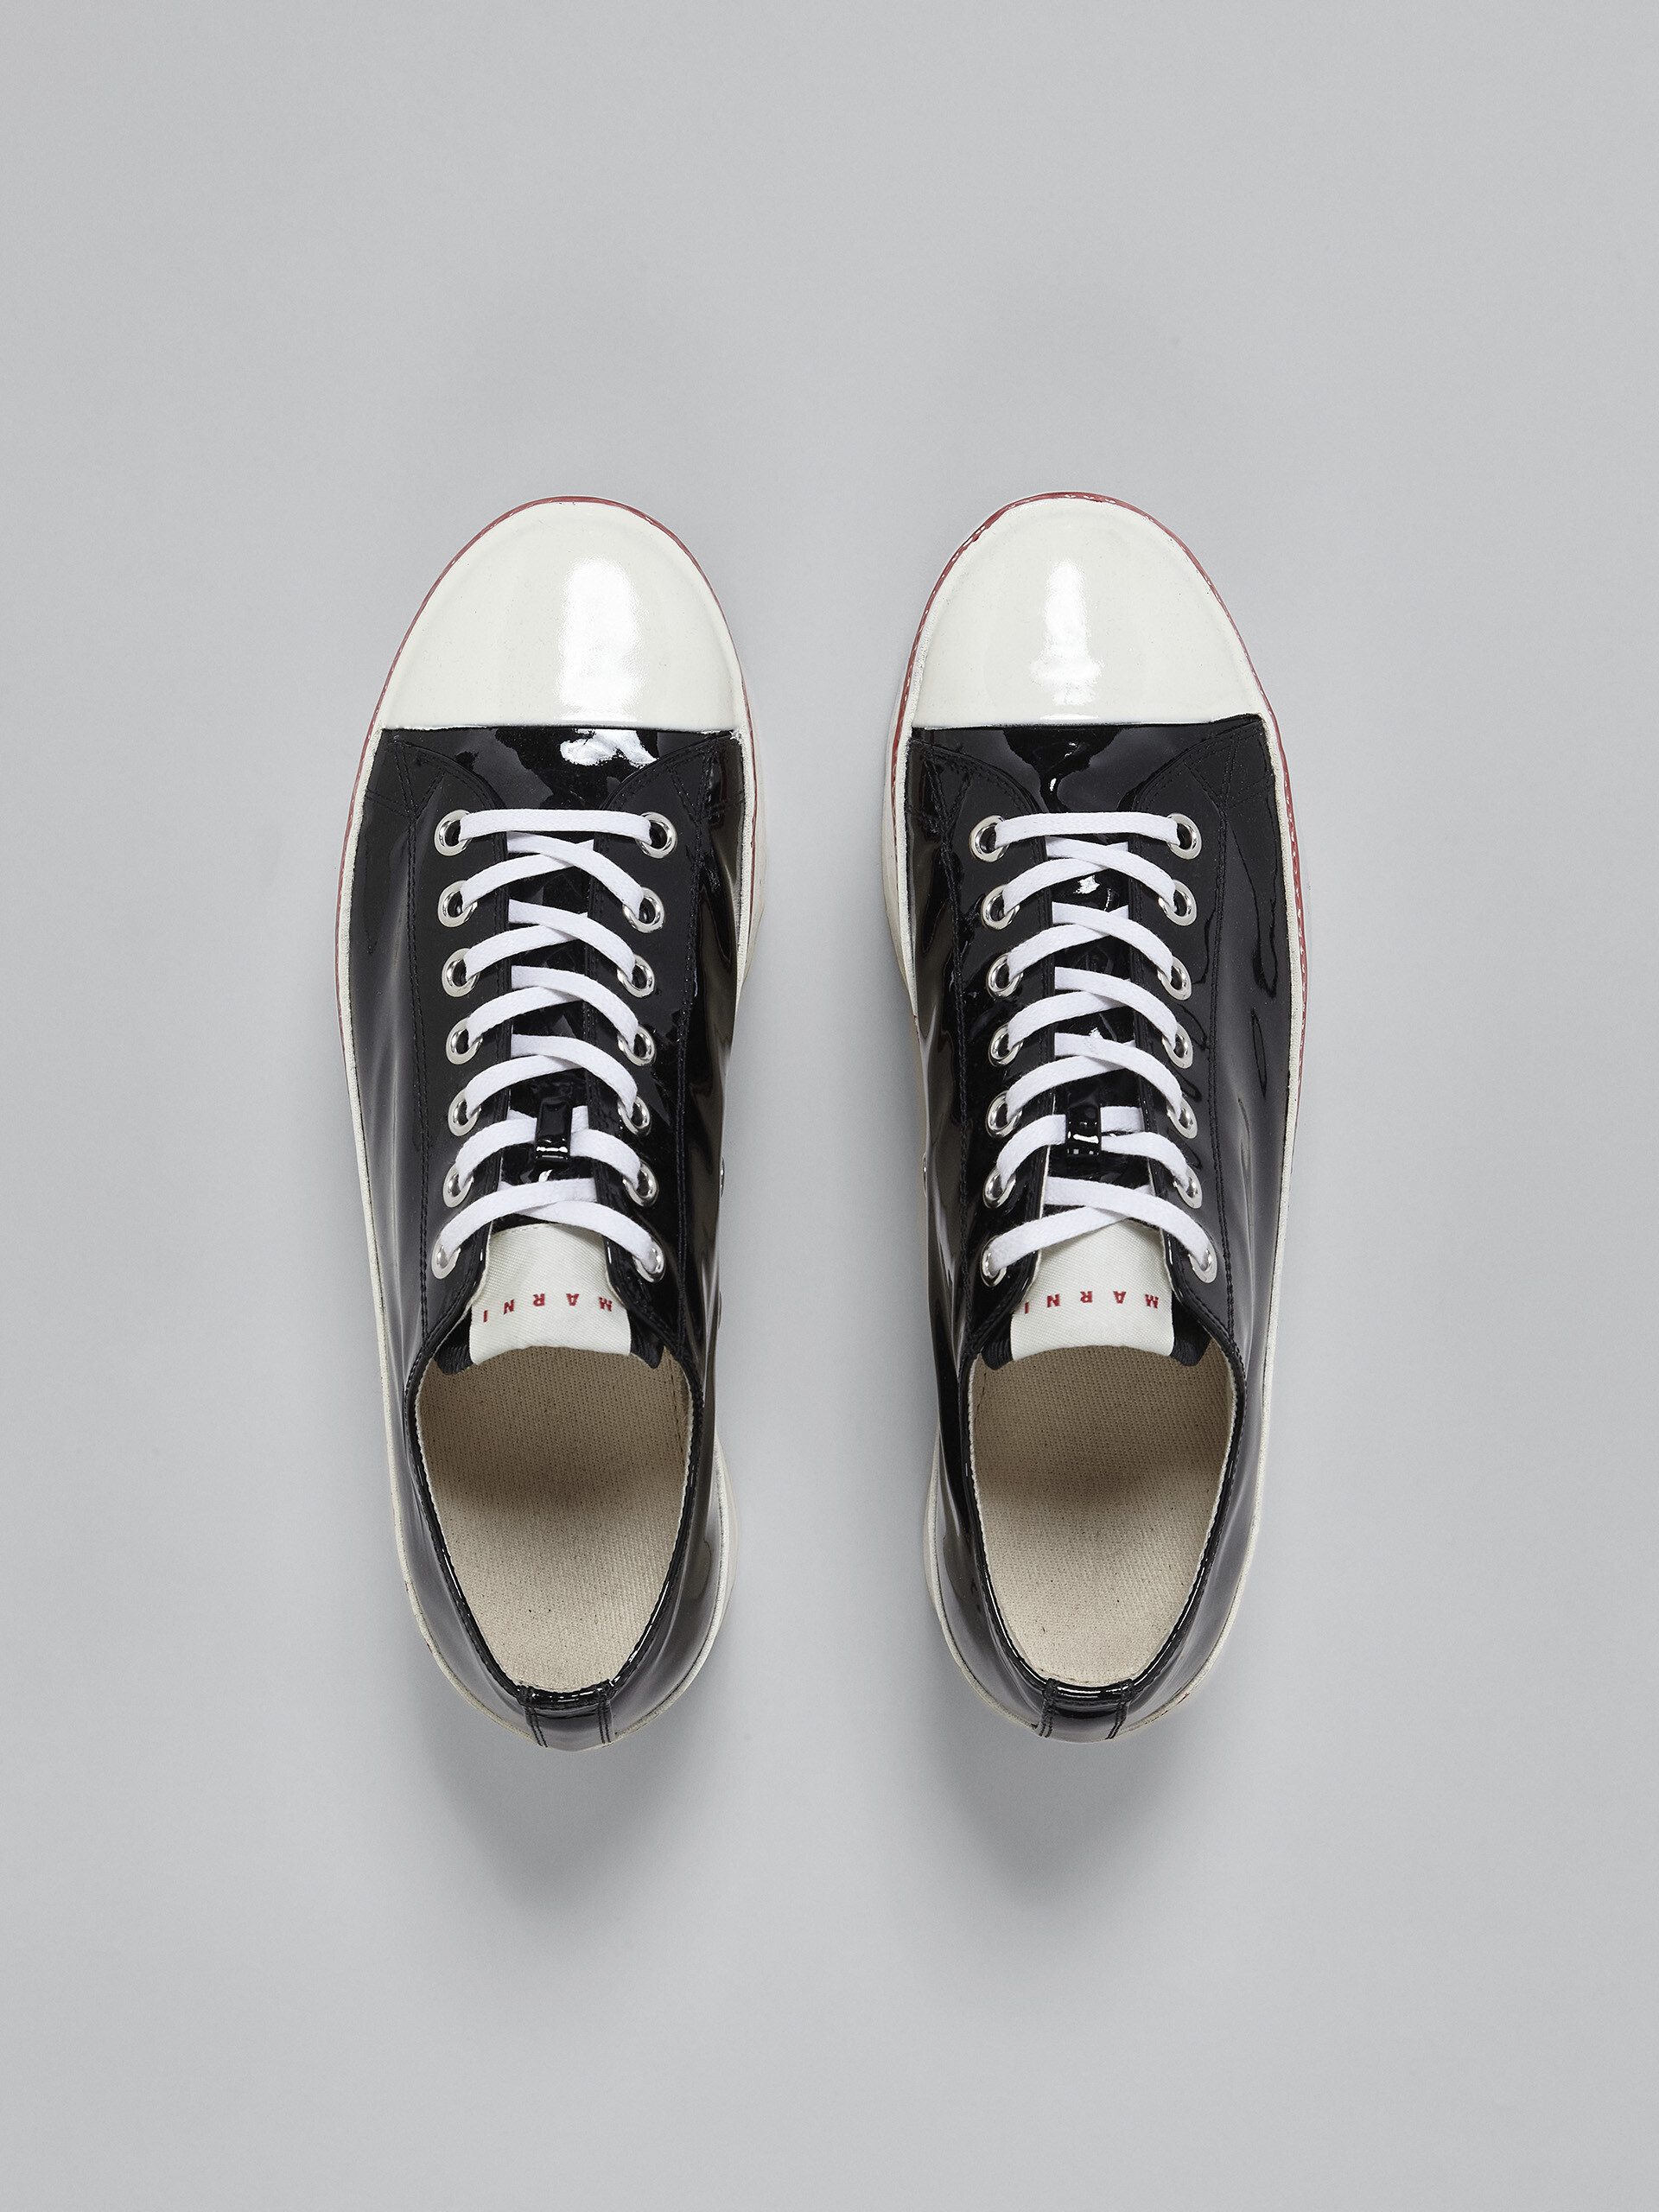 Patent leather platform sneaker - Sneakers - Image 4